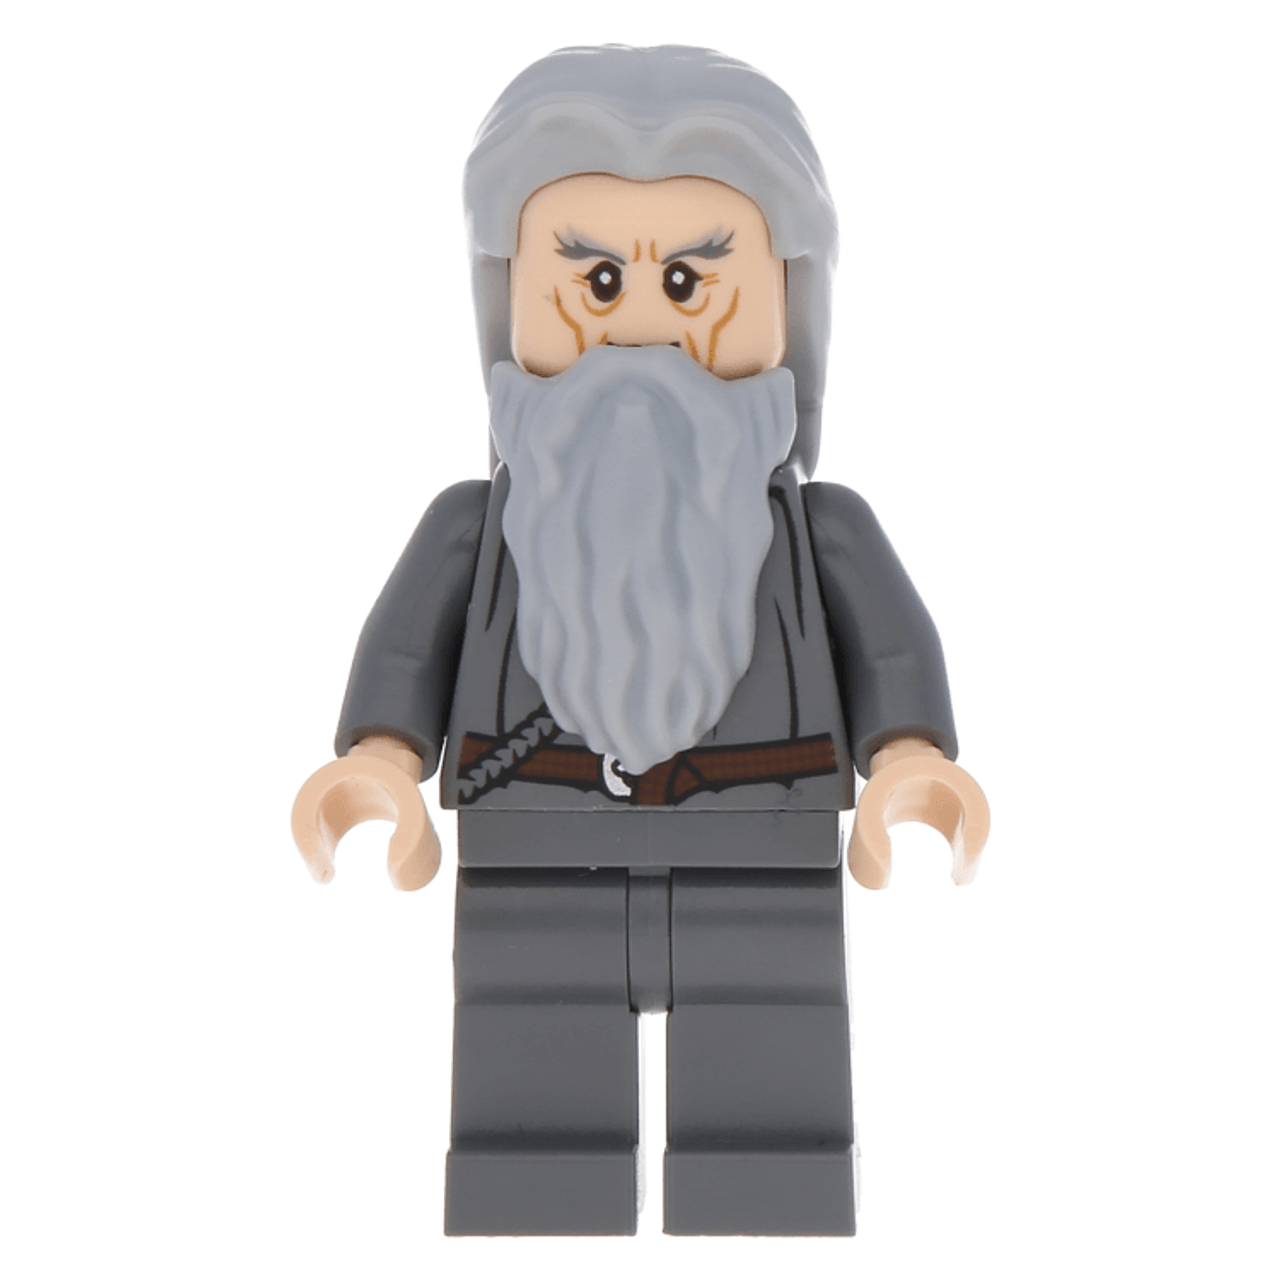 LEGO MINIFIG The Lord of the Rings Gandalf the Grey lor061